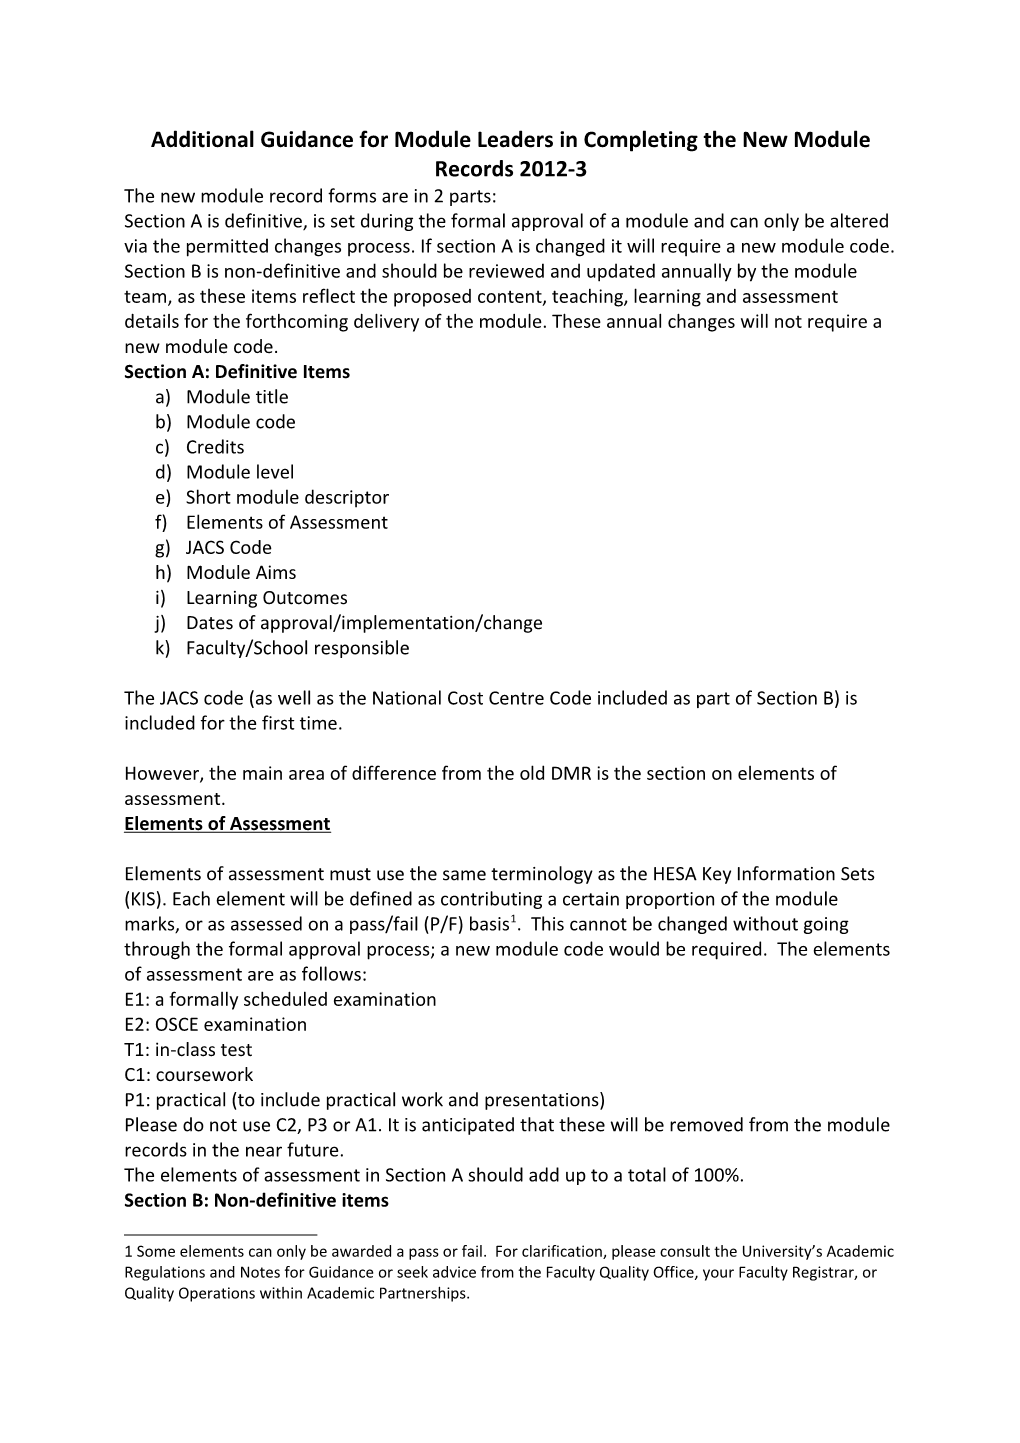 Additional Guidance for Module Leaders in Completing the New Module Records 2012-3